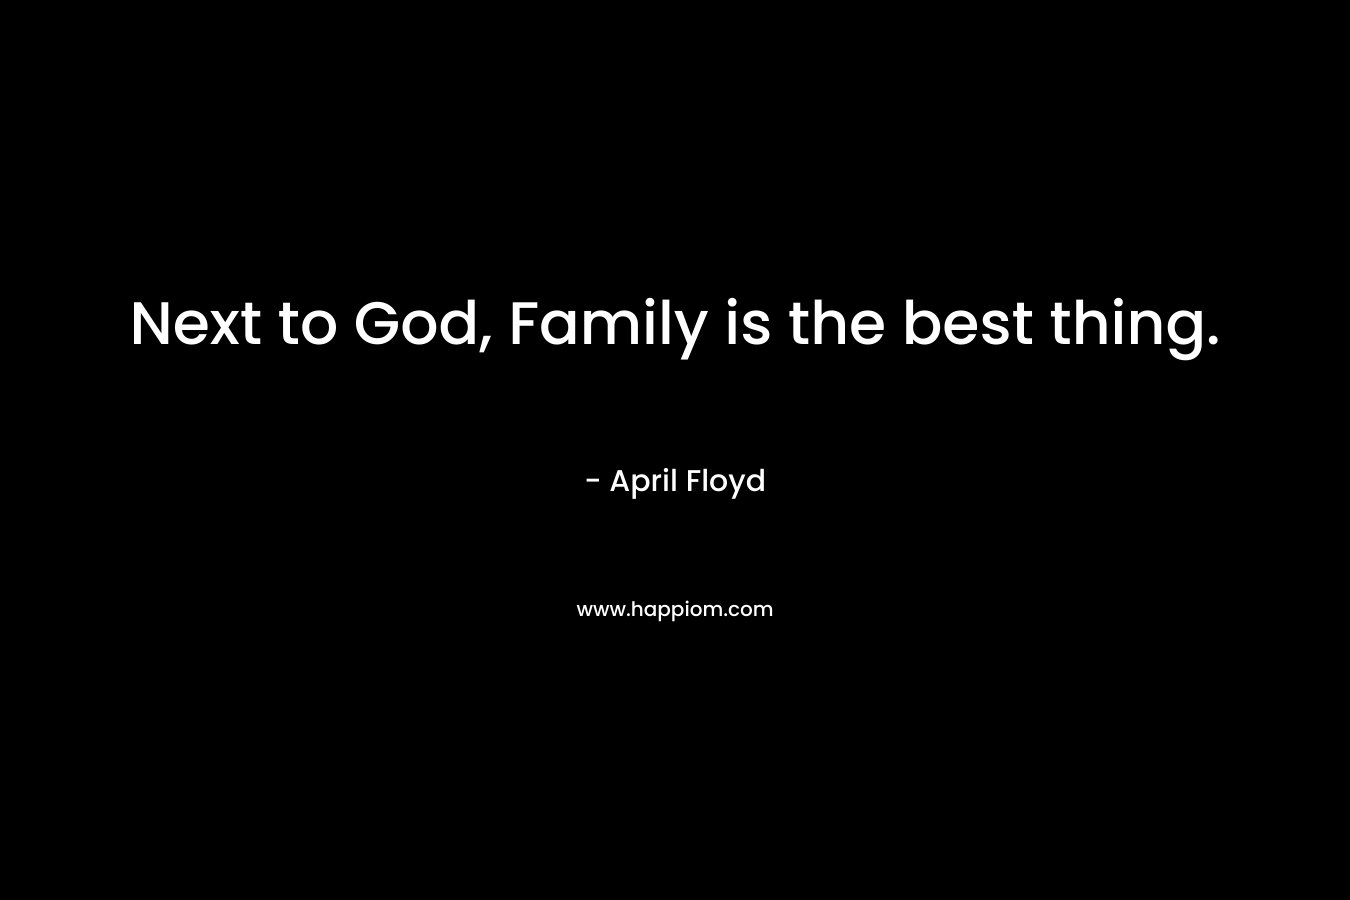 Next to God, Family is the best thing.